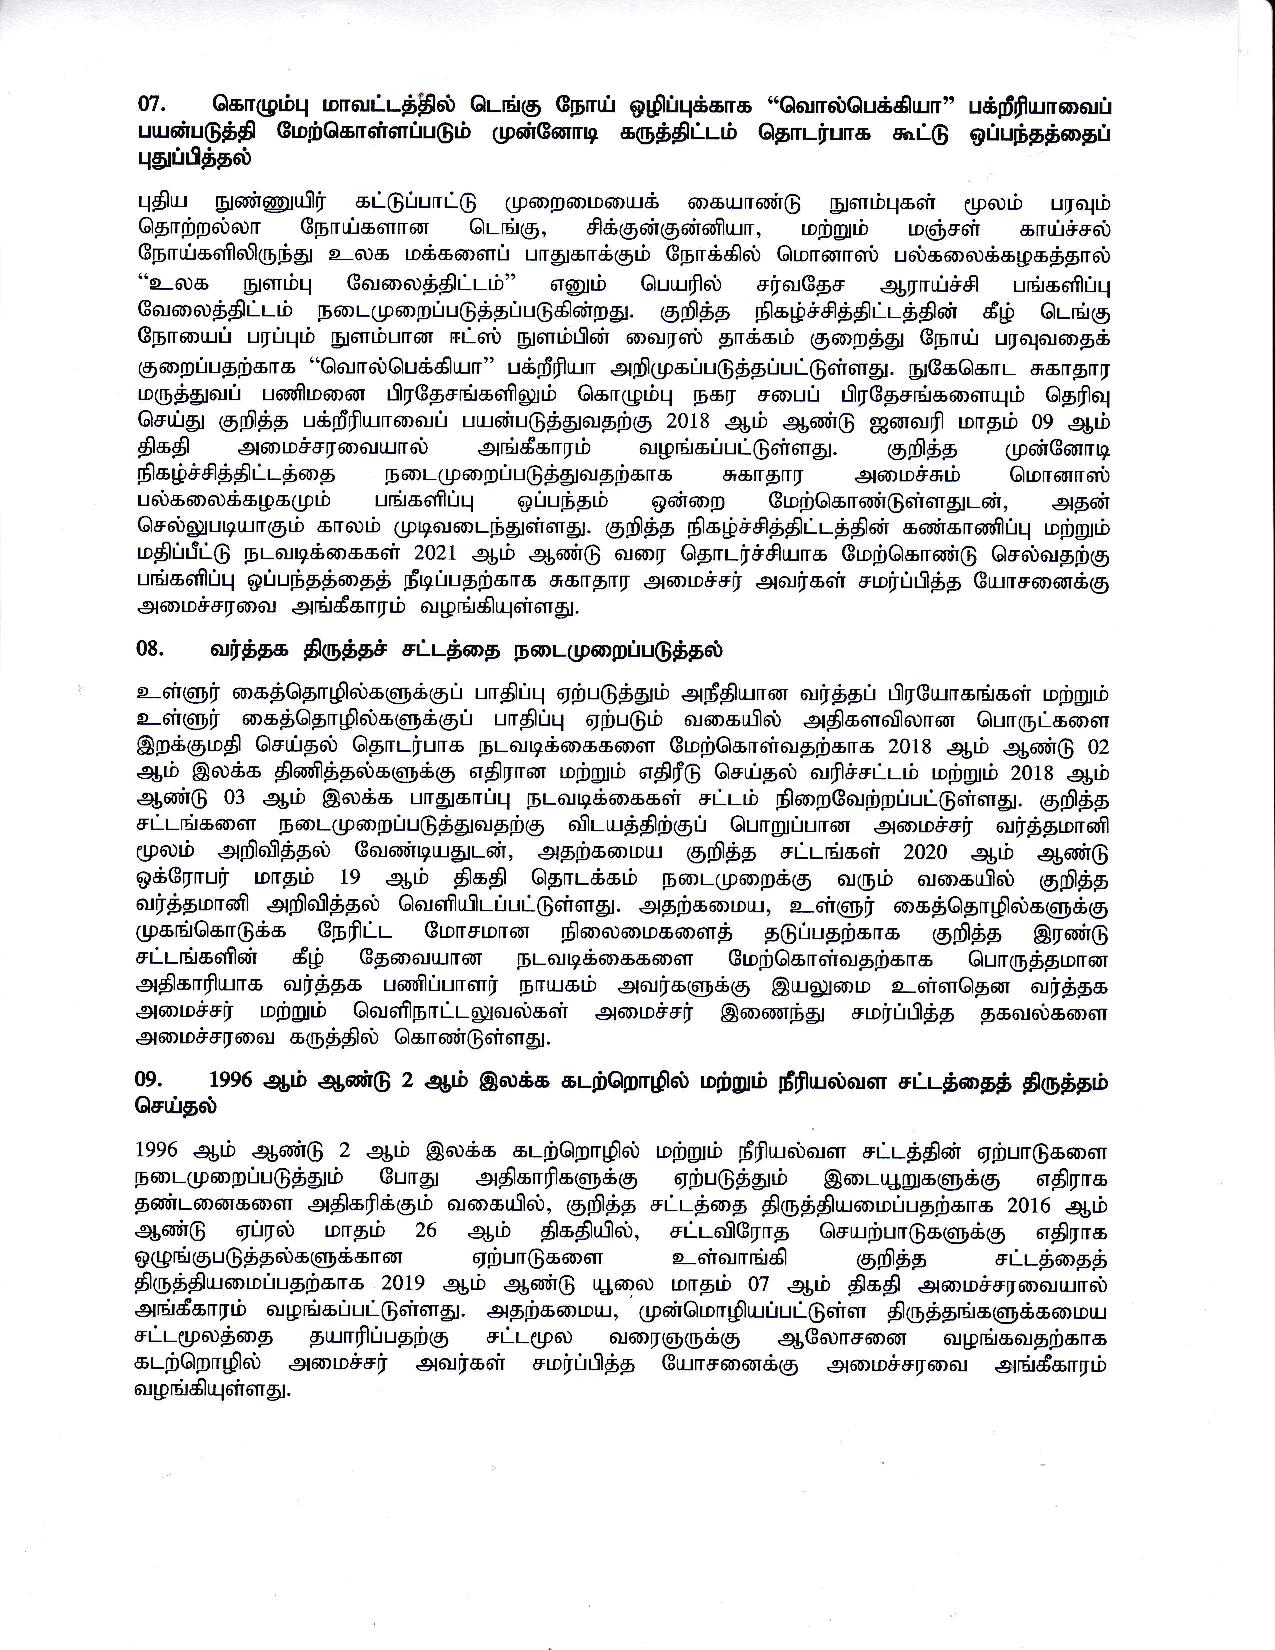 Cabinet Decision on 21.12.2020 Tamil page 003